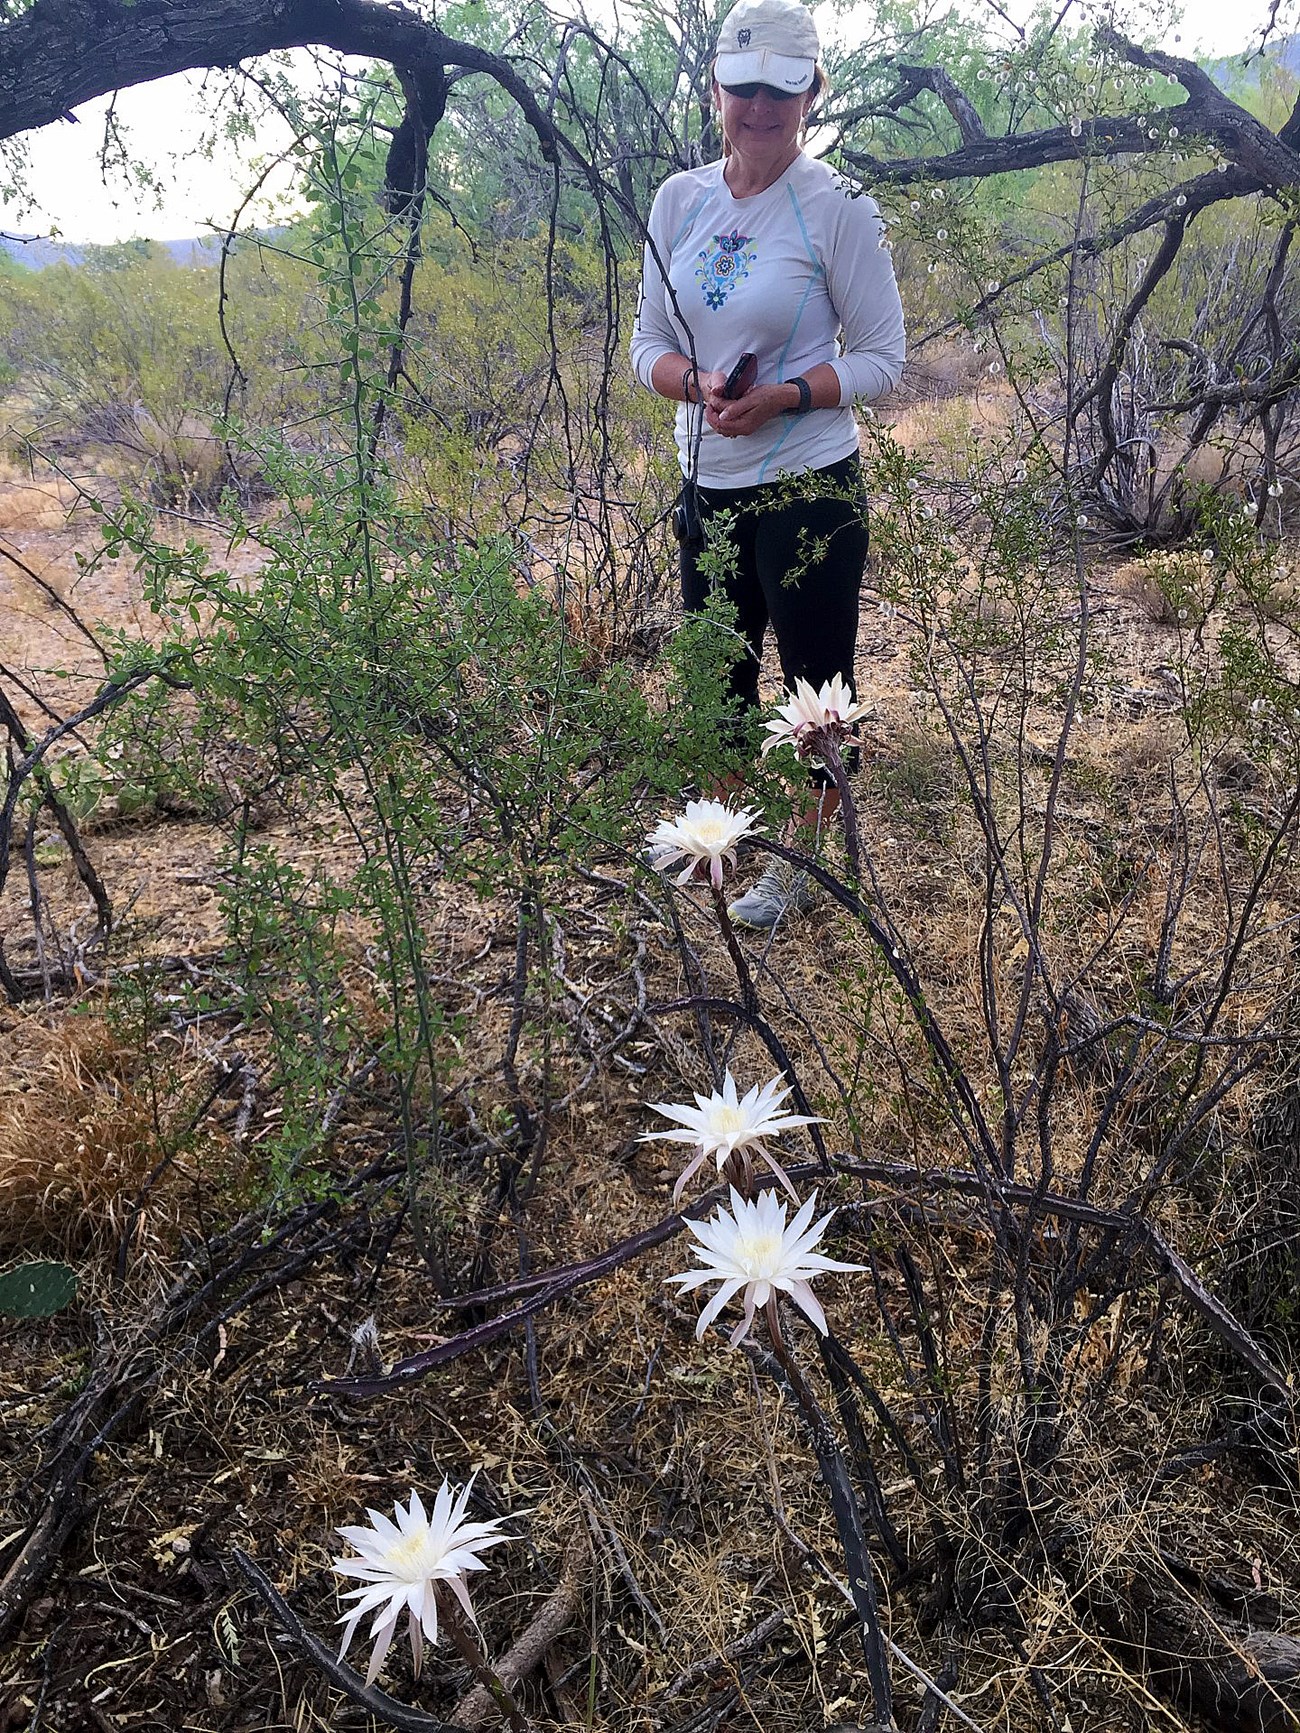 A woman in a ball cap looks at several white flowers in an arid landscape